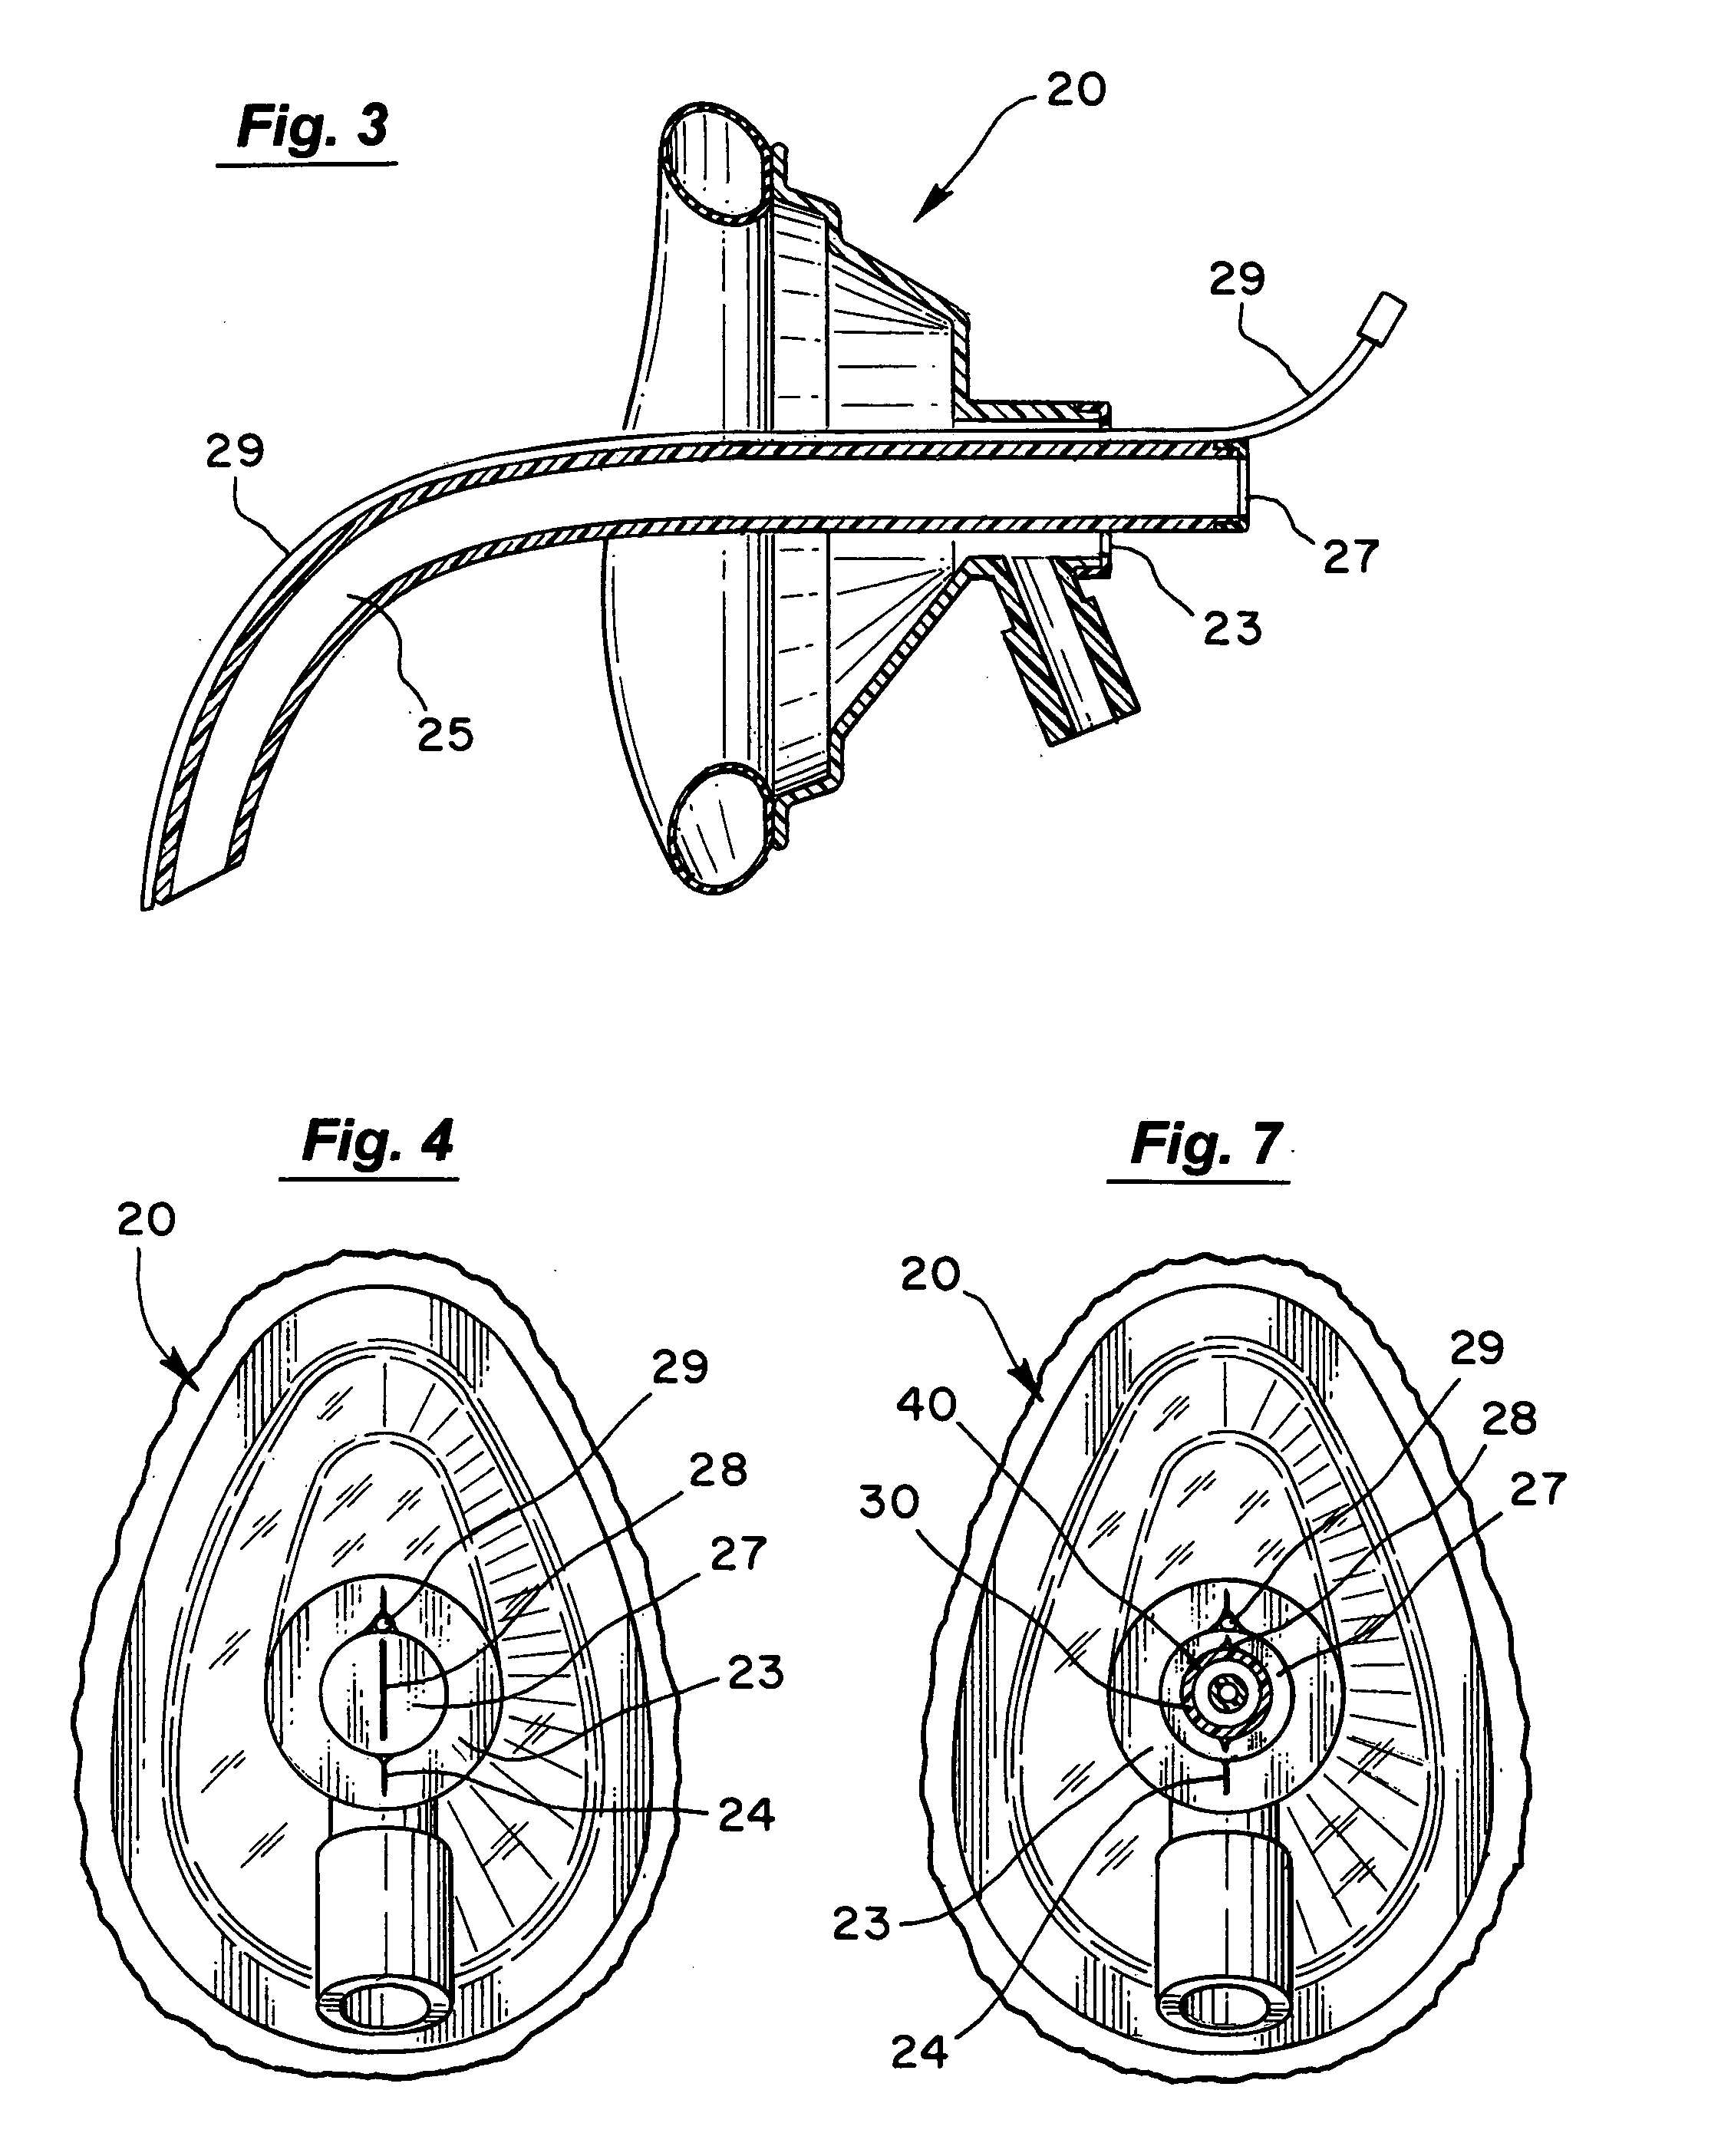 Method and apparatus for ventilation / oxygenation during guided insertion of an endotracheal tube